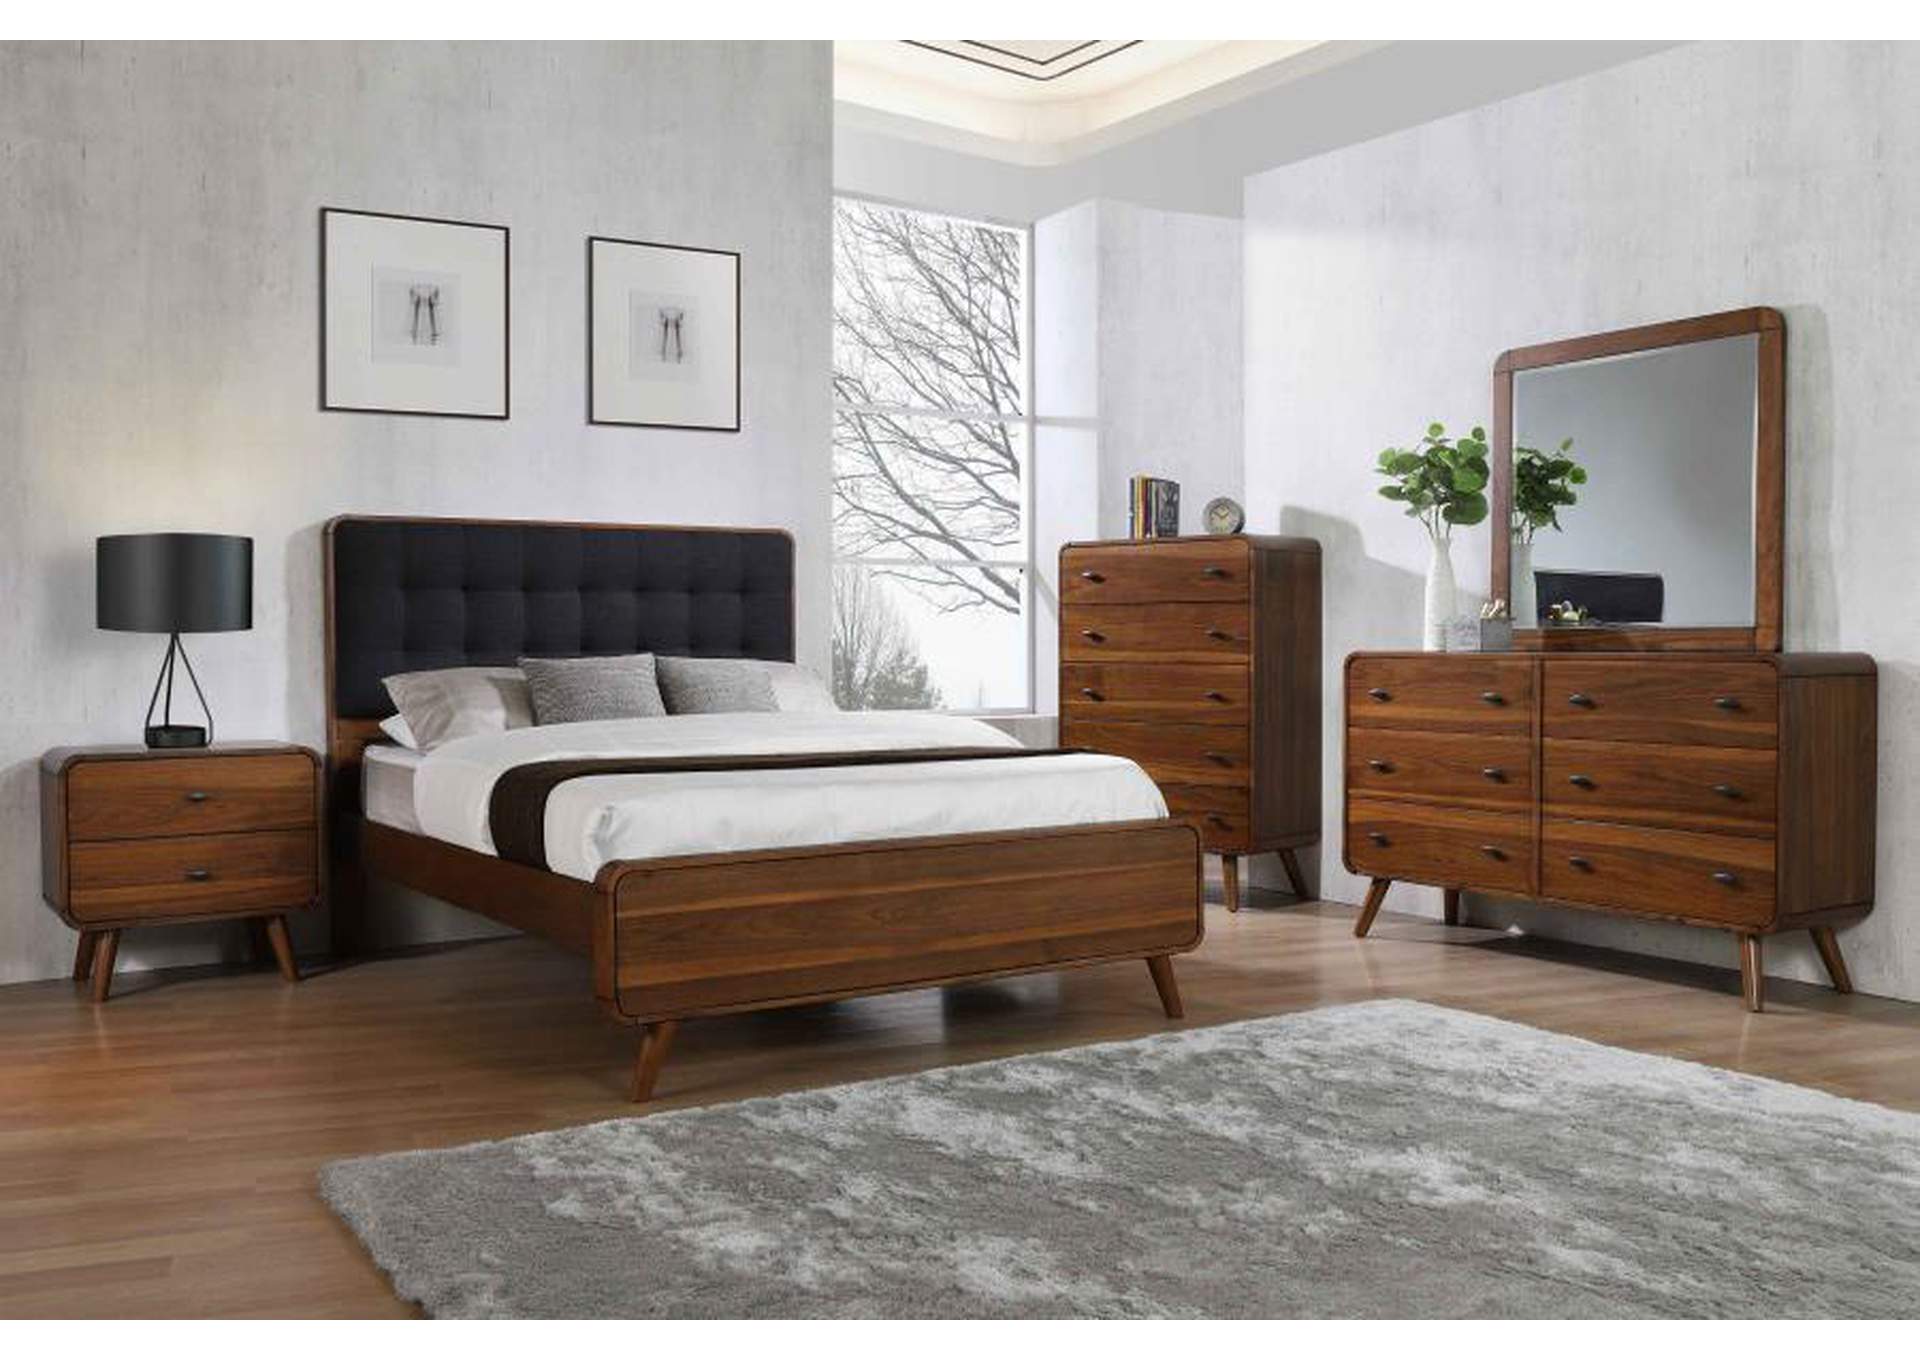 Robyn Queen Bed With Upholstered Headboard Dark Walnut,Coaster Furniture